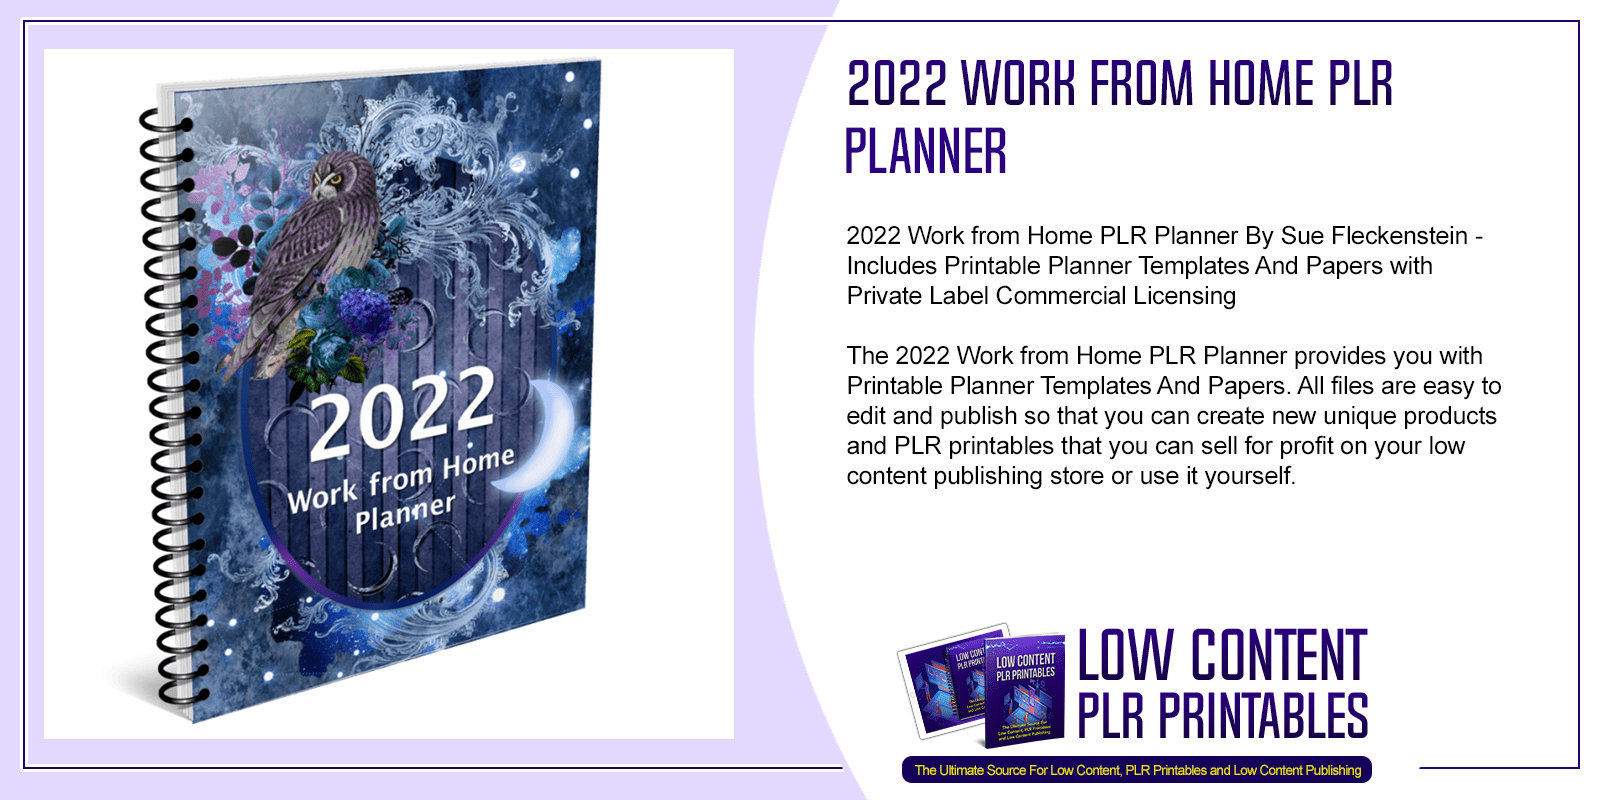 2022 Work from Home PLR Planner